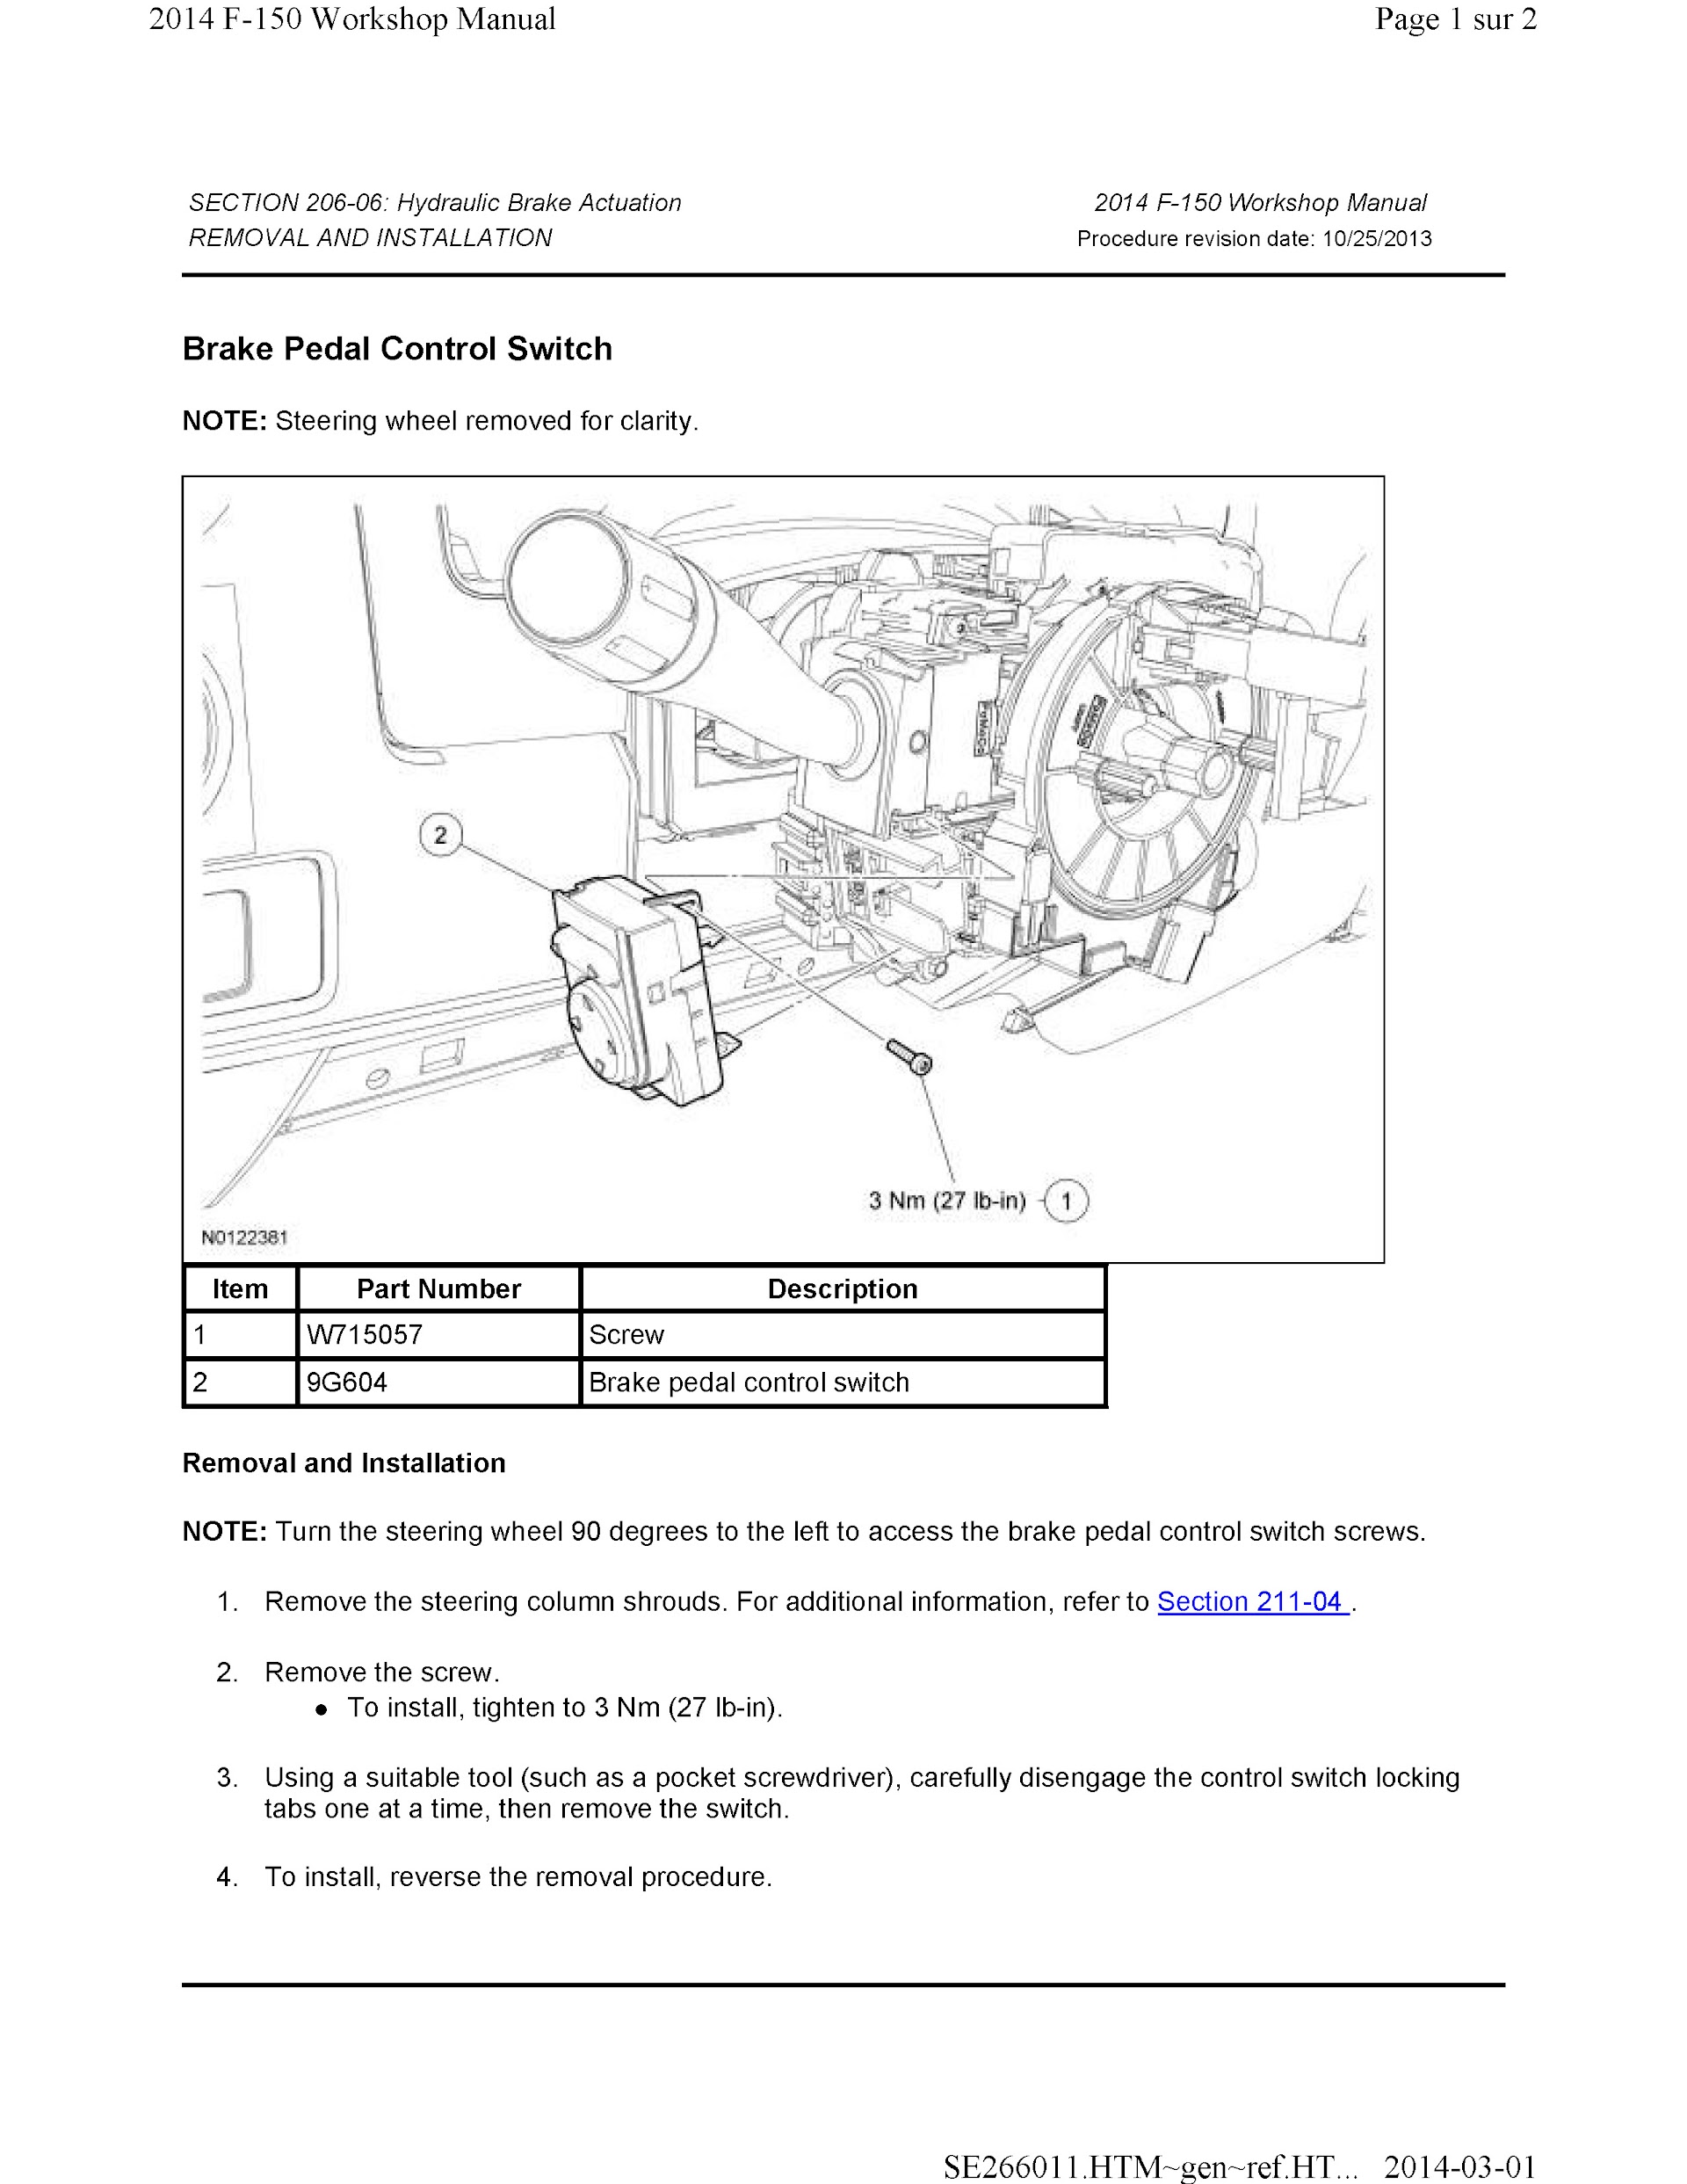 2011-2014 Ford F-150 Repair Manual, Hydraulic Brake Actuation Removal and Installation